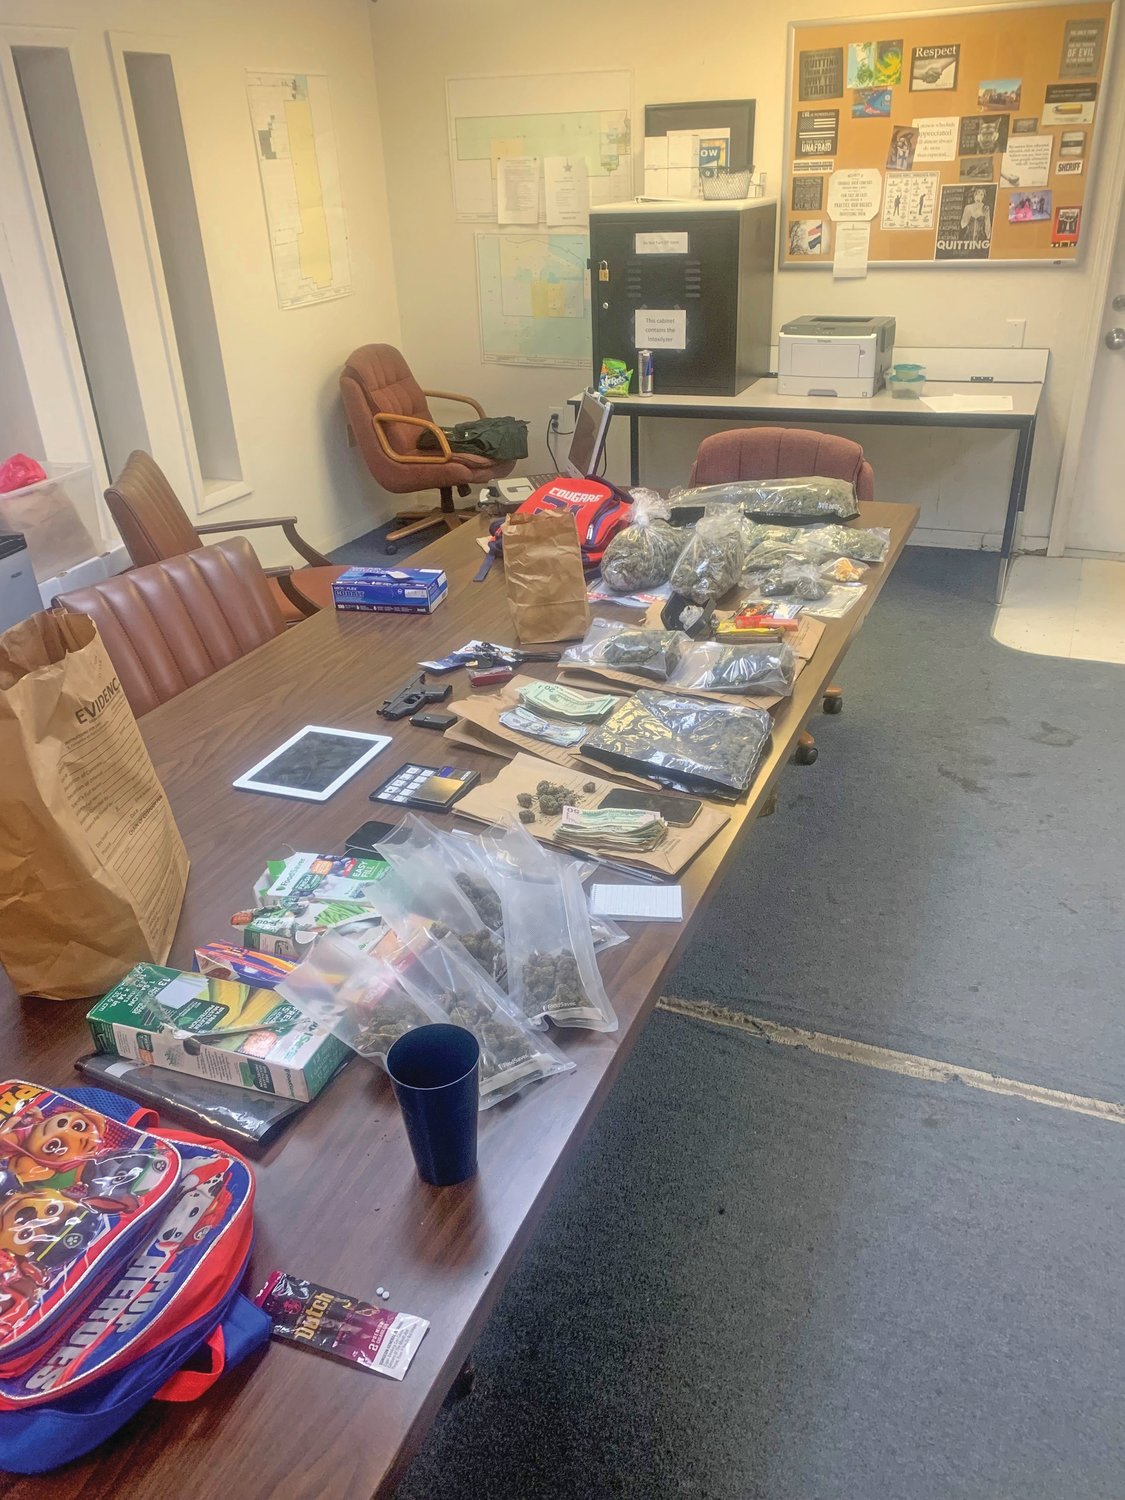 Deputies, along with the assistance of Investigators, located several bags of marijuana with a total weight of 4.1 pounds, 248 OxyContin pills, a handgun along with ammunition, electronic communication devices, a scale and packaging material for sale. Investigators also collected $3,339.00 in US Currency.